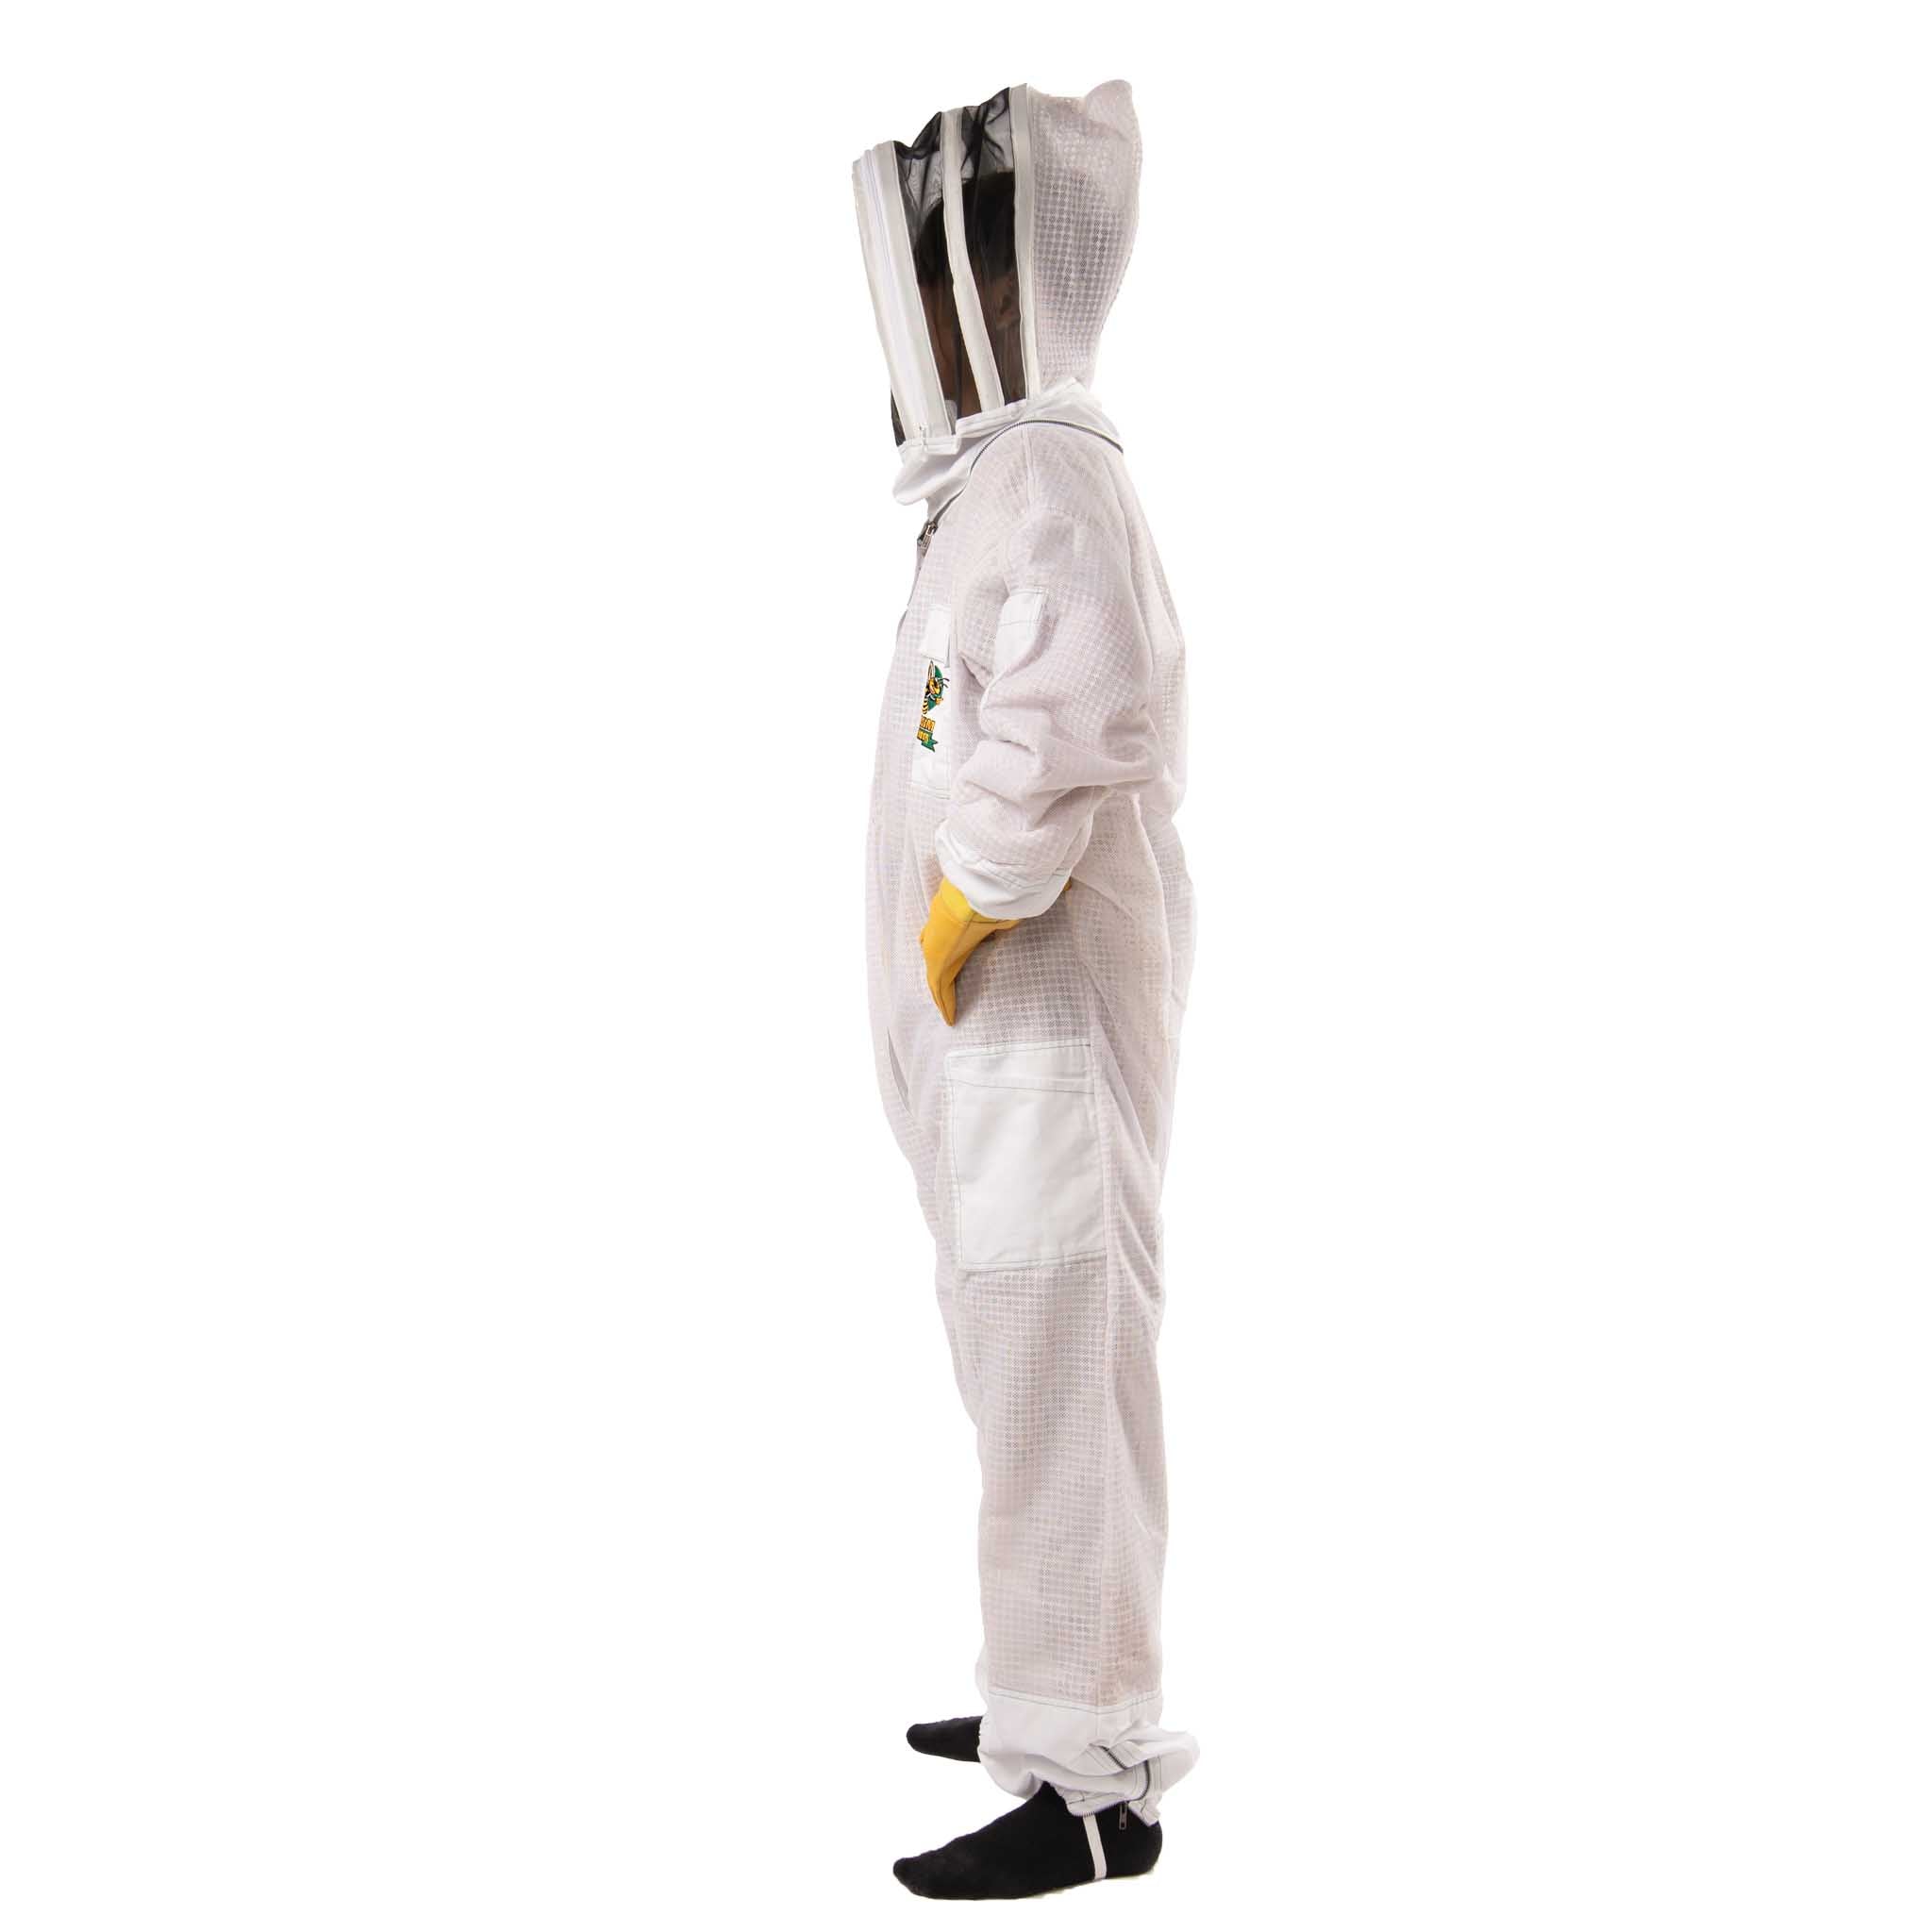 Swarm Commander 3-Layer Mesh Fully Ventilated Suit